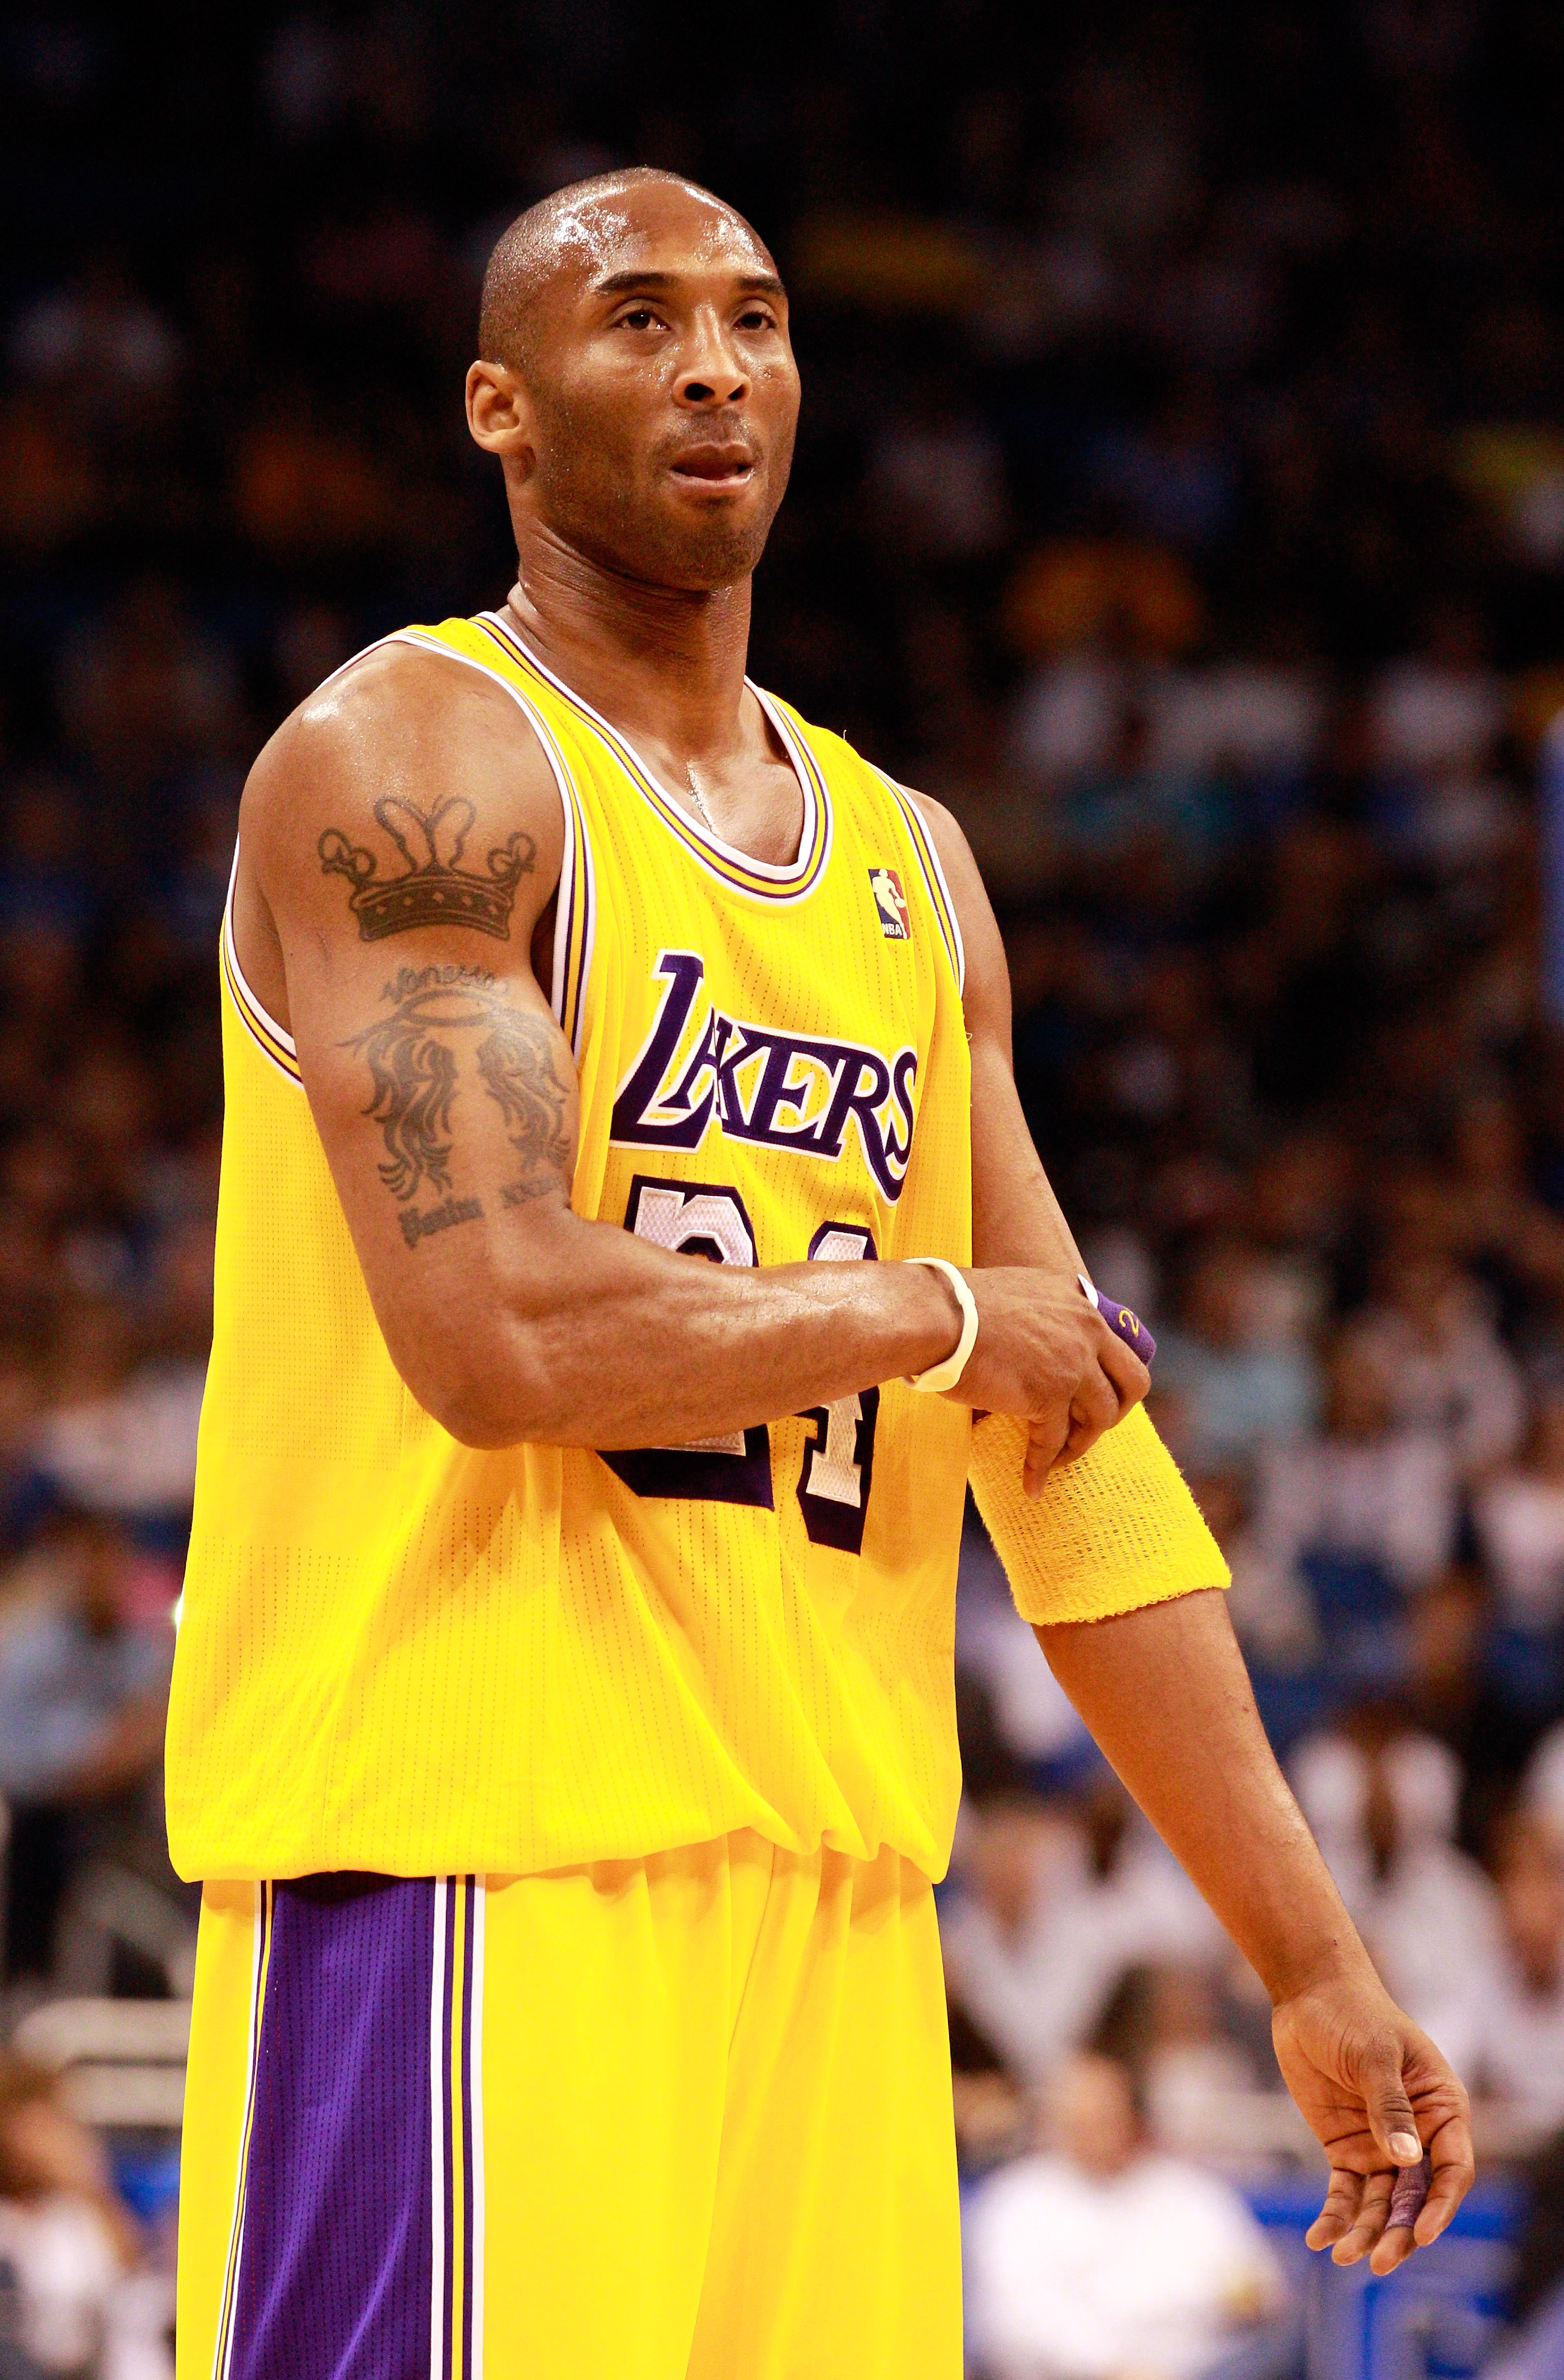 ORLANDO, FL - FEBRUARY 13:  Kobe Bryant #24 of the Los Angeles Lakers looks to the scoreboard during the game against the Orlando Magic at Amway Arena on February 13, 2011 in Orlando, Florida.  NOTE TO USER: User expressly acknowledges and agrees that, by